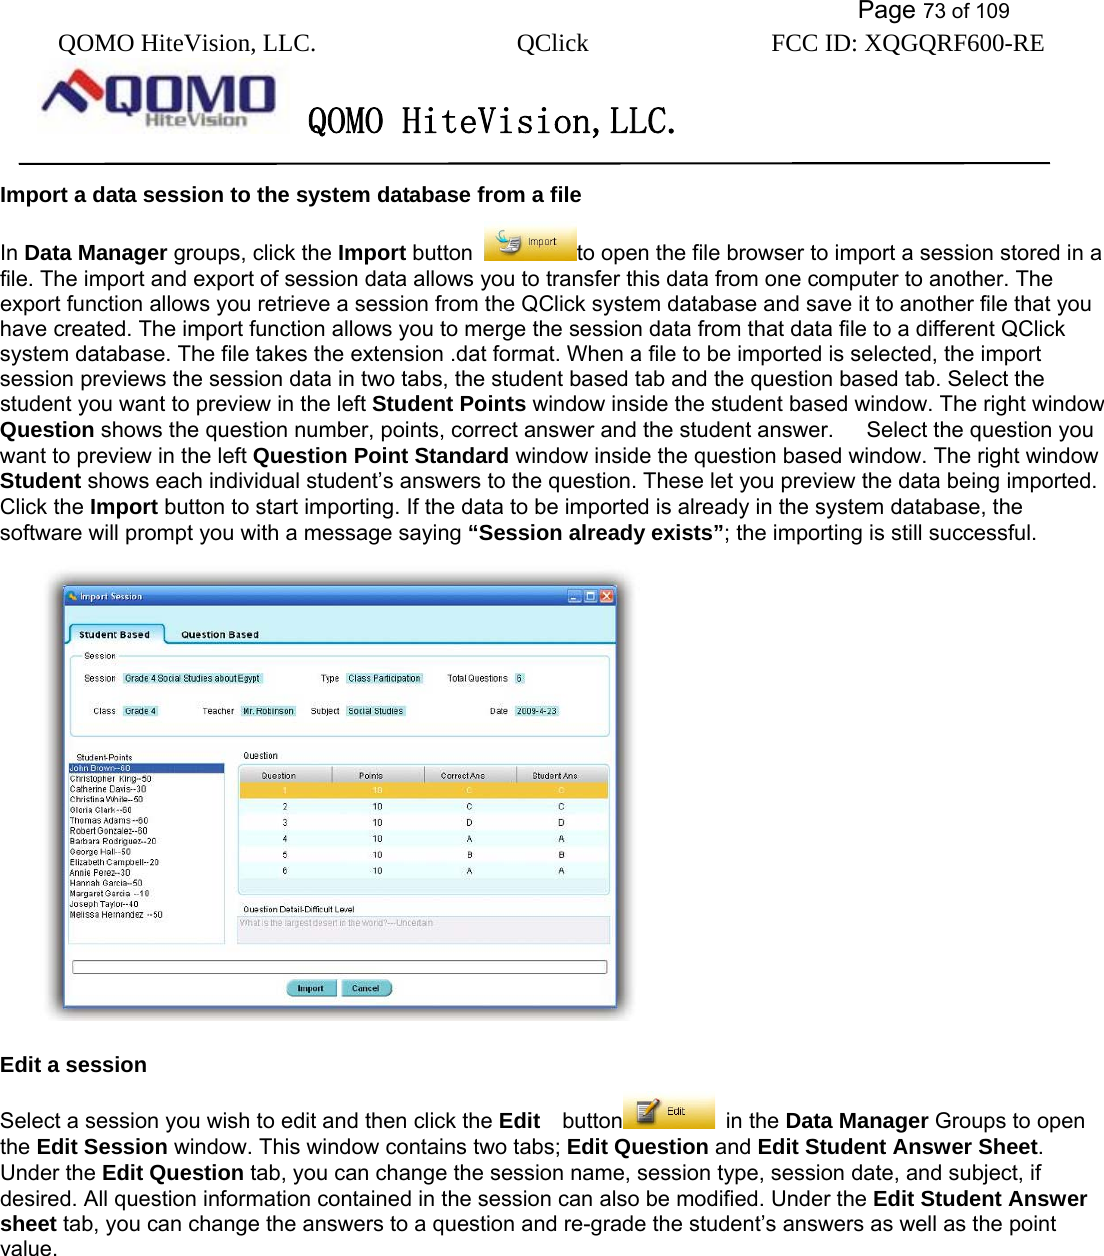           Page 73 of 109 QOMO HiteVision, LLC.  QClick        FCC ID: XQGQRF600-RE     QOMO HiteVision,LLC.   Import a data session to the system database from a file In Data Manager groups, click the Import button  to open the file browser to import a session stored in a file. The import and export of session data allows you to transfer this data from one computer to another. The export function allows you retrieve a session from the QClick system database and save it to another file that you have created. The import function allows you to merge the session data from that data file to a different QClick system database. The file takes the extension .dat format. When a file to be imported is selected, the import session previews the session data in two tabs, the student based tab and the question based tab. Select the student you want to preview in the left Student Points window inside the student based window. The right window Question shows the question number, points, correct answer and the student answer.   Select the question you want to preview in the left Question Point Standard window inside the question based window. The right window Student shows each individual student’s answers to the question. These let you preview the data being imported. Click the Import button to start importing. If the data to be imported is already in the system database, the software will prompt you with a message saying “Session already exists”; the importing is still successful.    Edit a session Select a session you wish to edit and then click the Edit   button  in the Data Manager Groups to open the Edit Session window. This window contains two tabs; Edit Question and Edit Student Answer Sheet. Under the Edit Question tab, you can change the session name, session type, session date, and subject, if desired. All question information contained in the session can also be modified. Under the Edit Student Answer sheet tab, you can change the answers to a question and re-grade the student’s answers as well as the point value.   